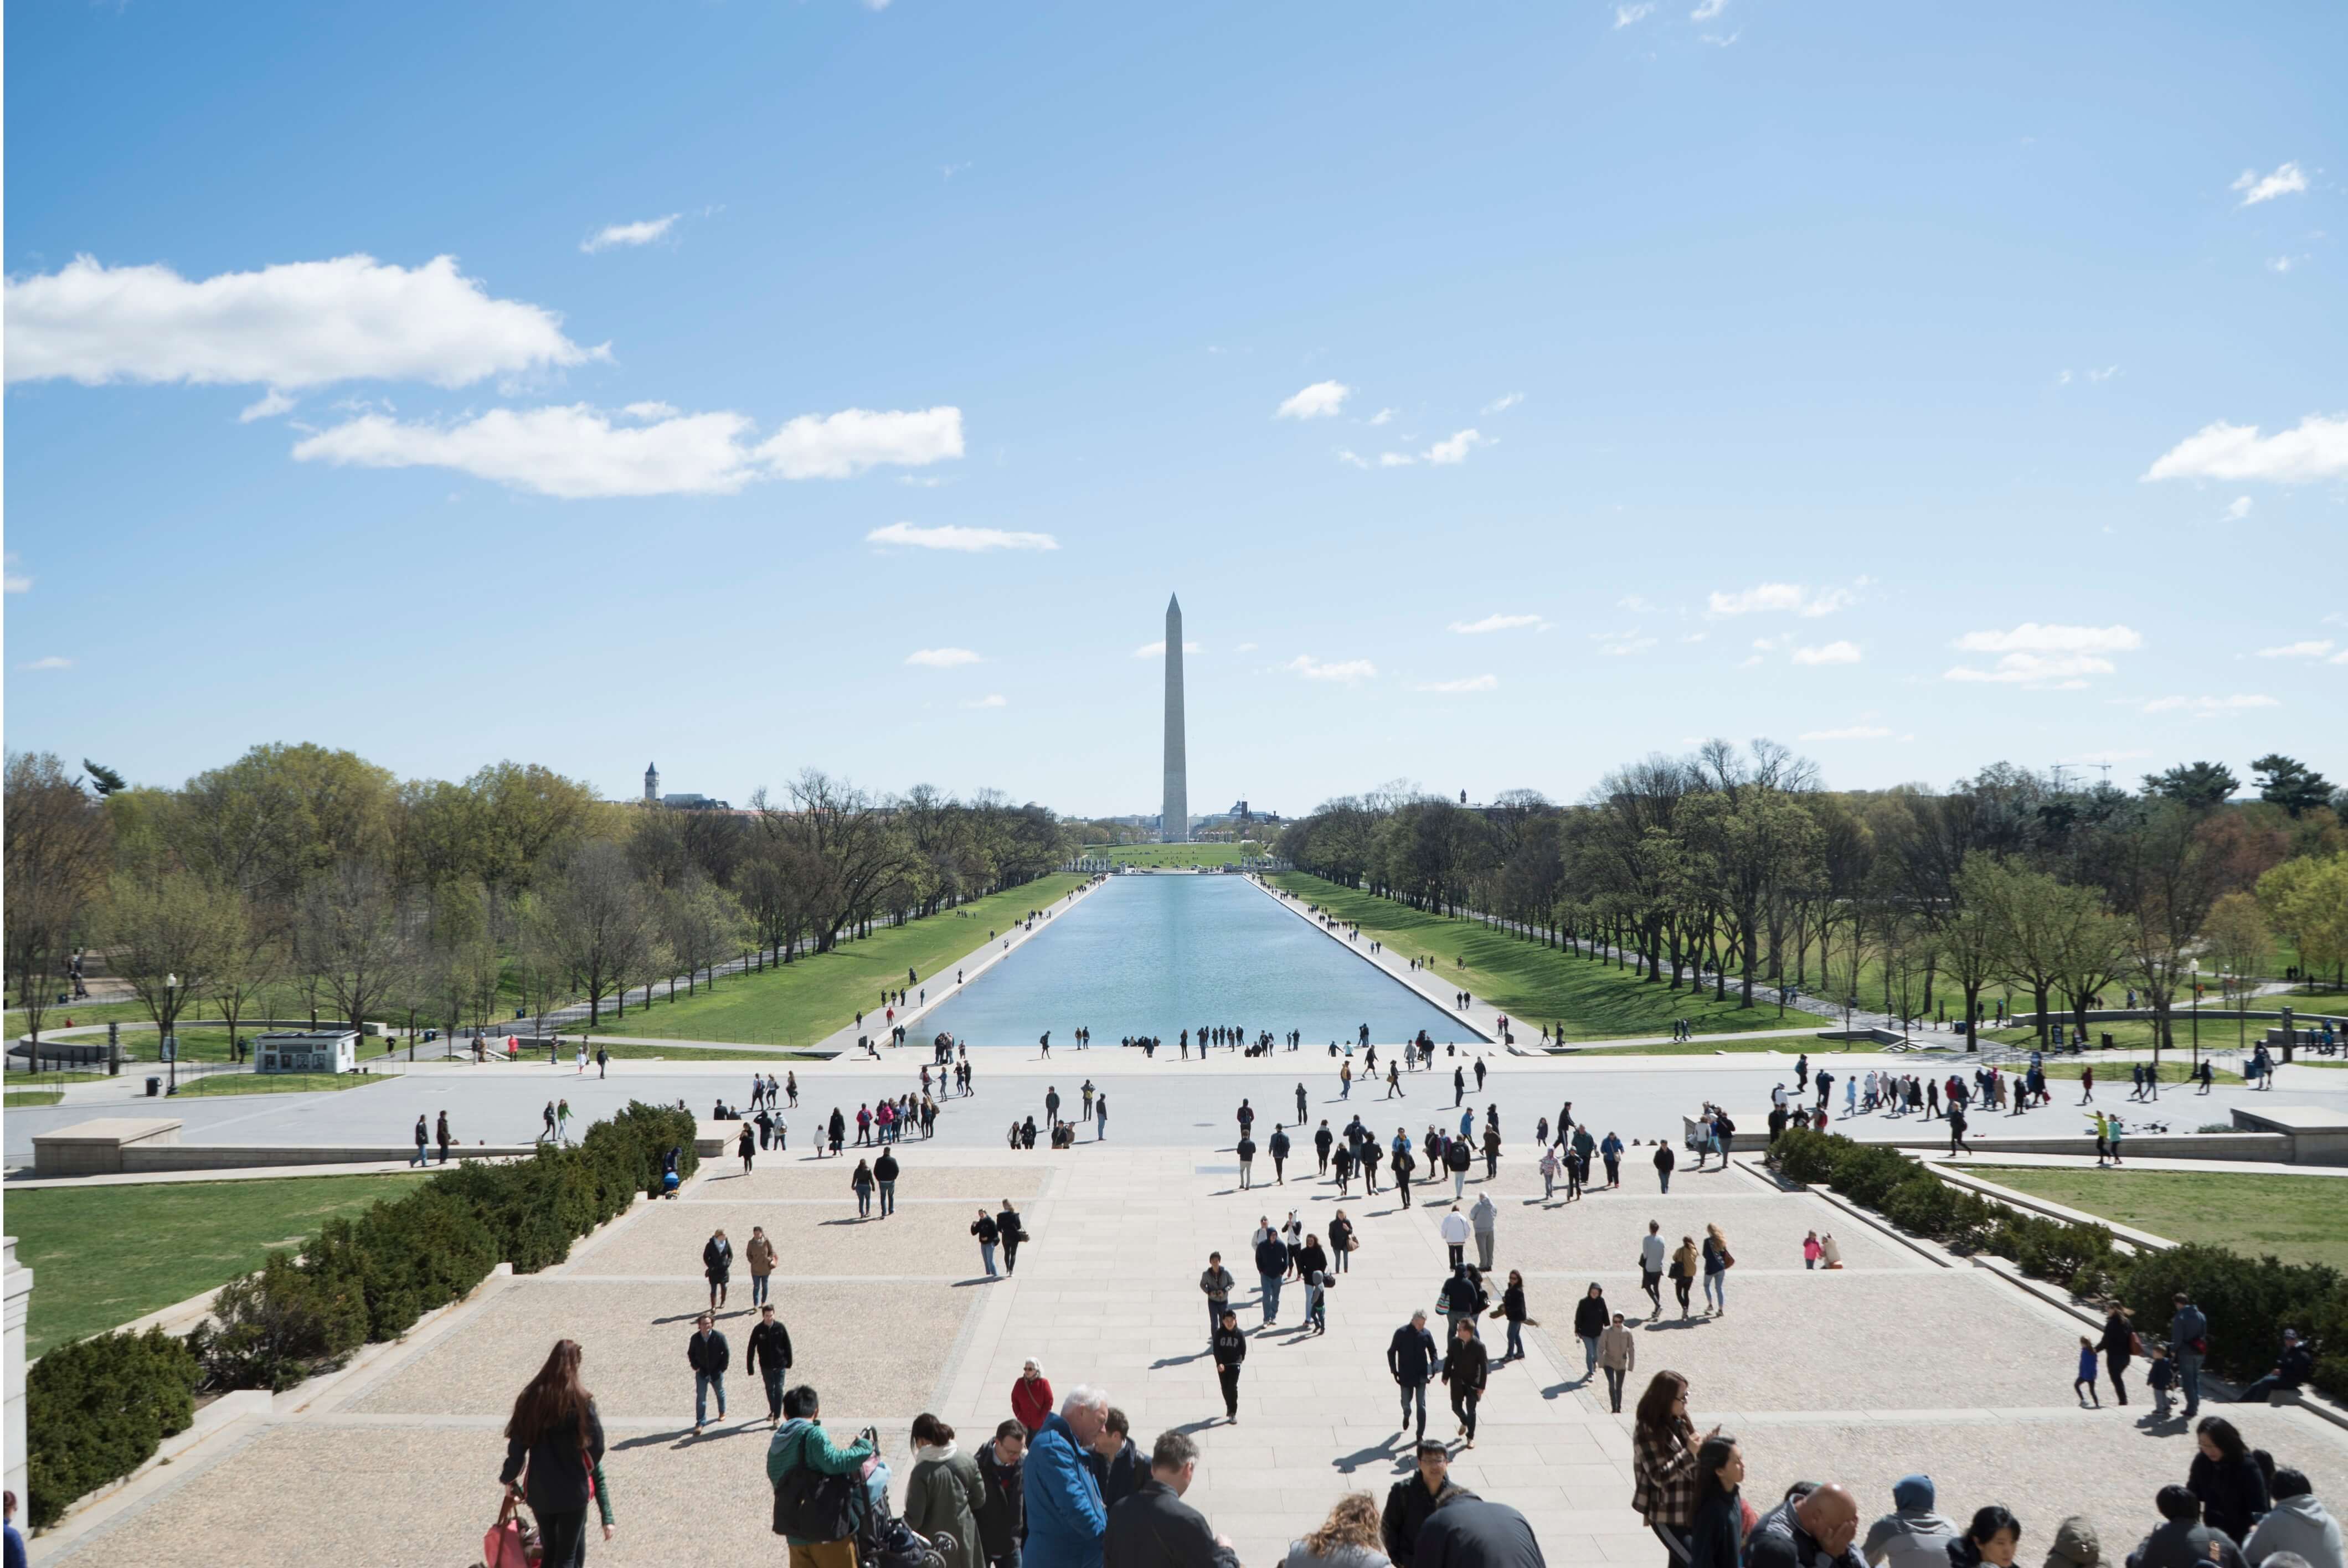 DC Sightseeing Tours: 4 Exciting Ways to See the City